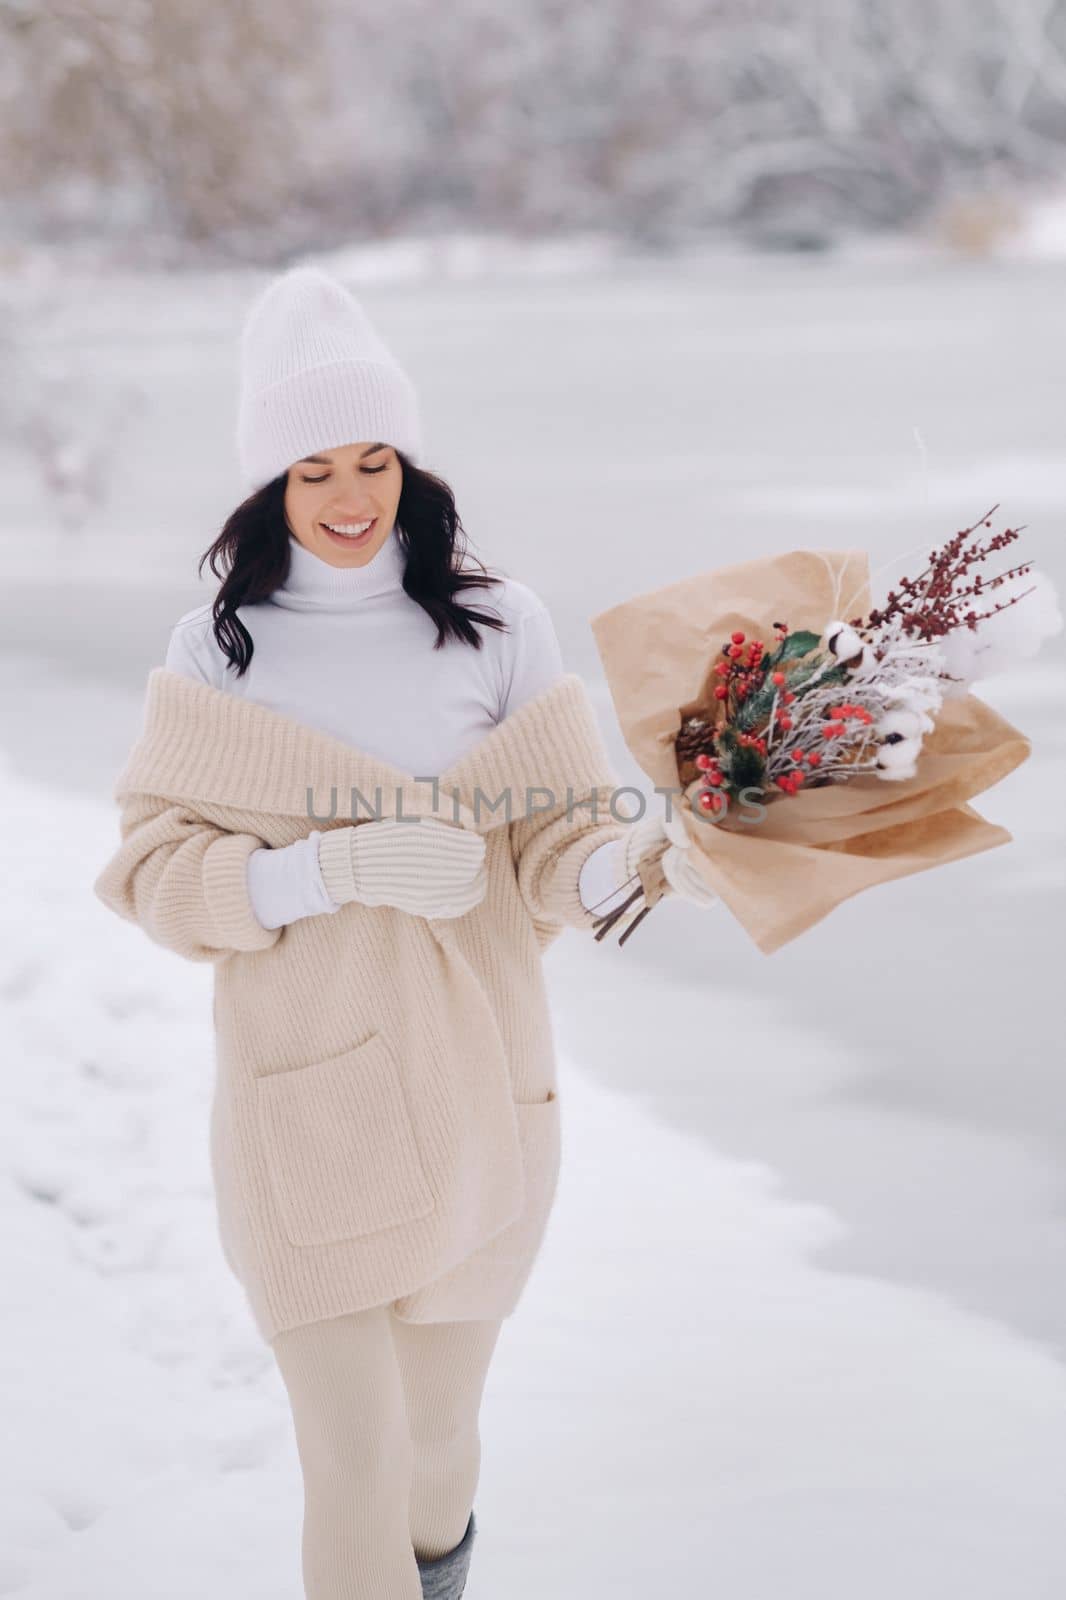 A girl in a beige cardigan and winter flowers walks in nature in the snowy season. Winter weather by Lobachad